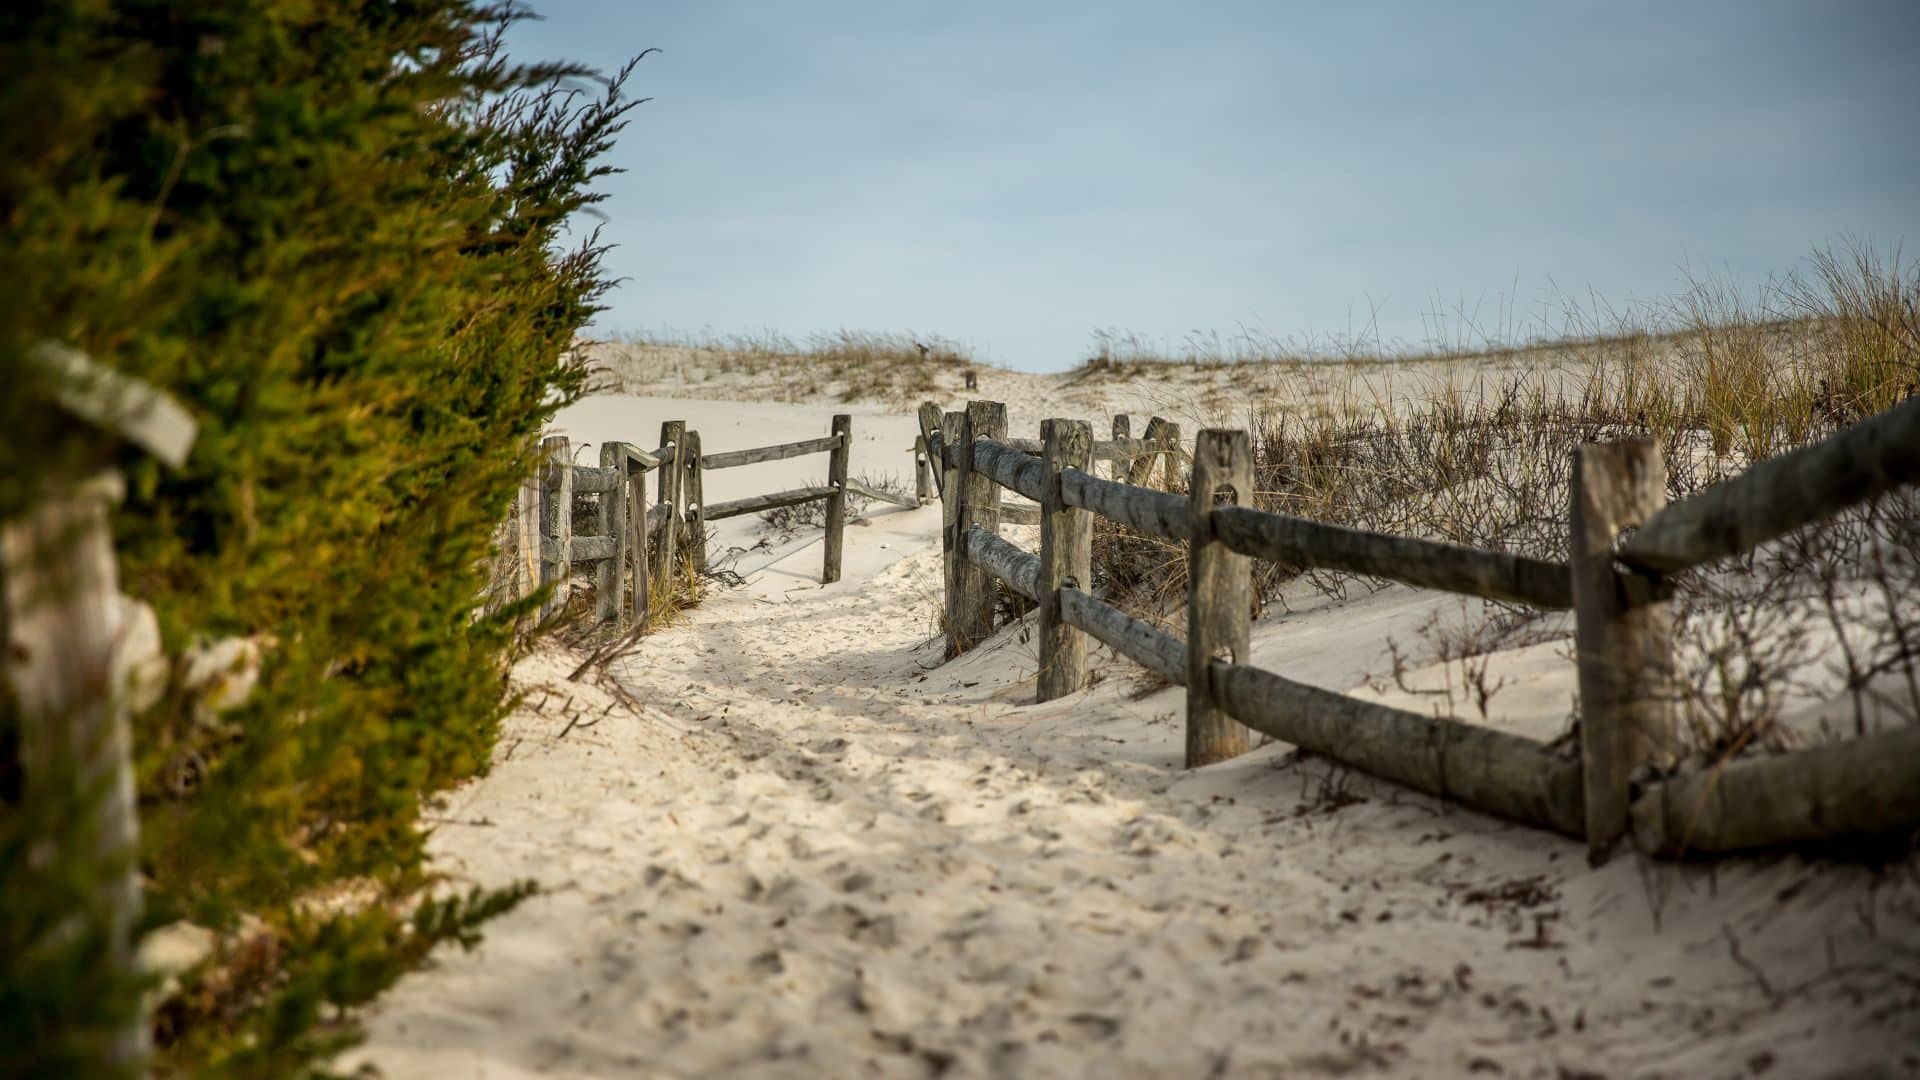 View of path in sand on beach with a wooden fence on both sides.